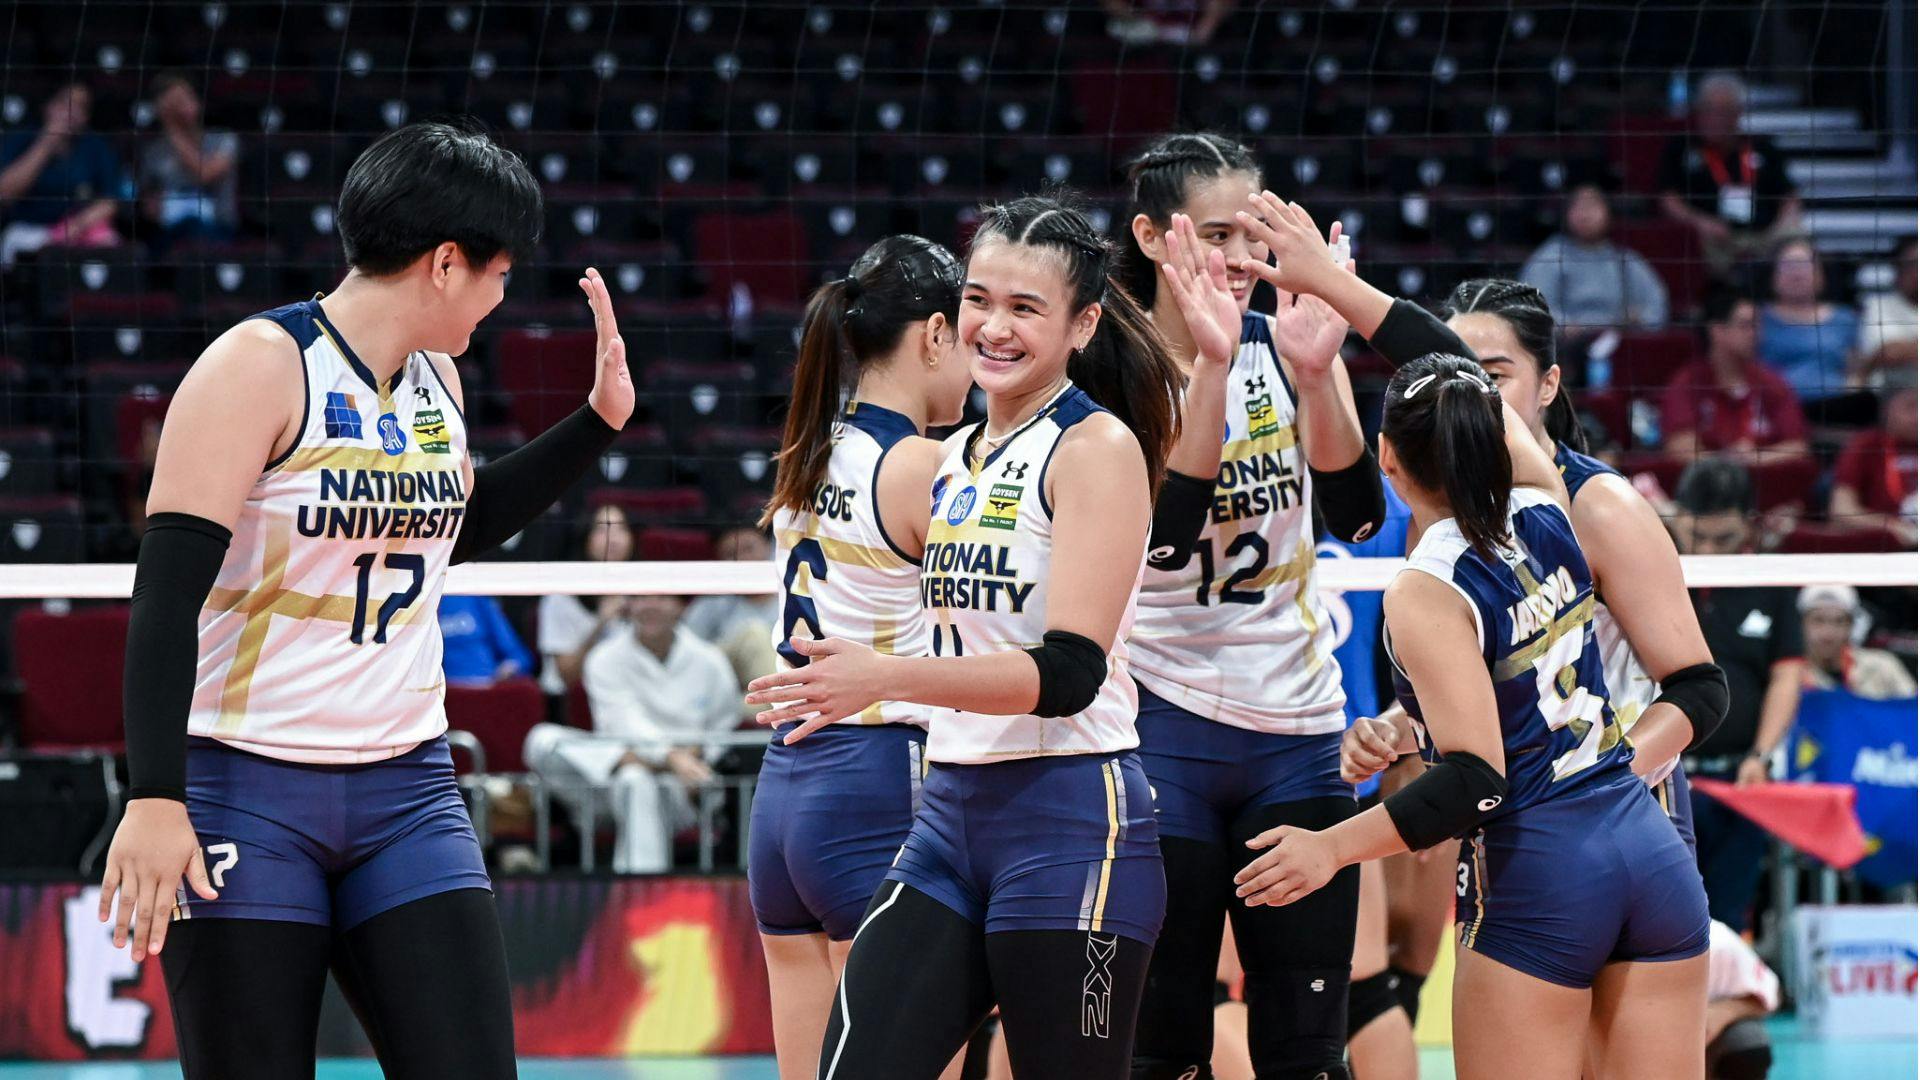 UAAP: Lady Bulldogs dodge a bullet, NU survives Ateneo in five-set thriller for first win in Season 86